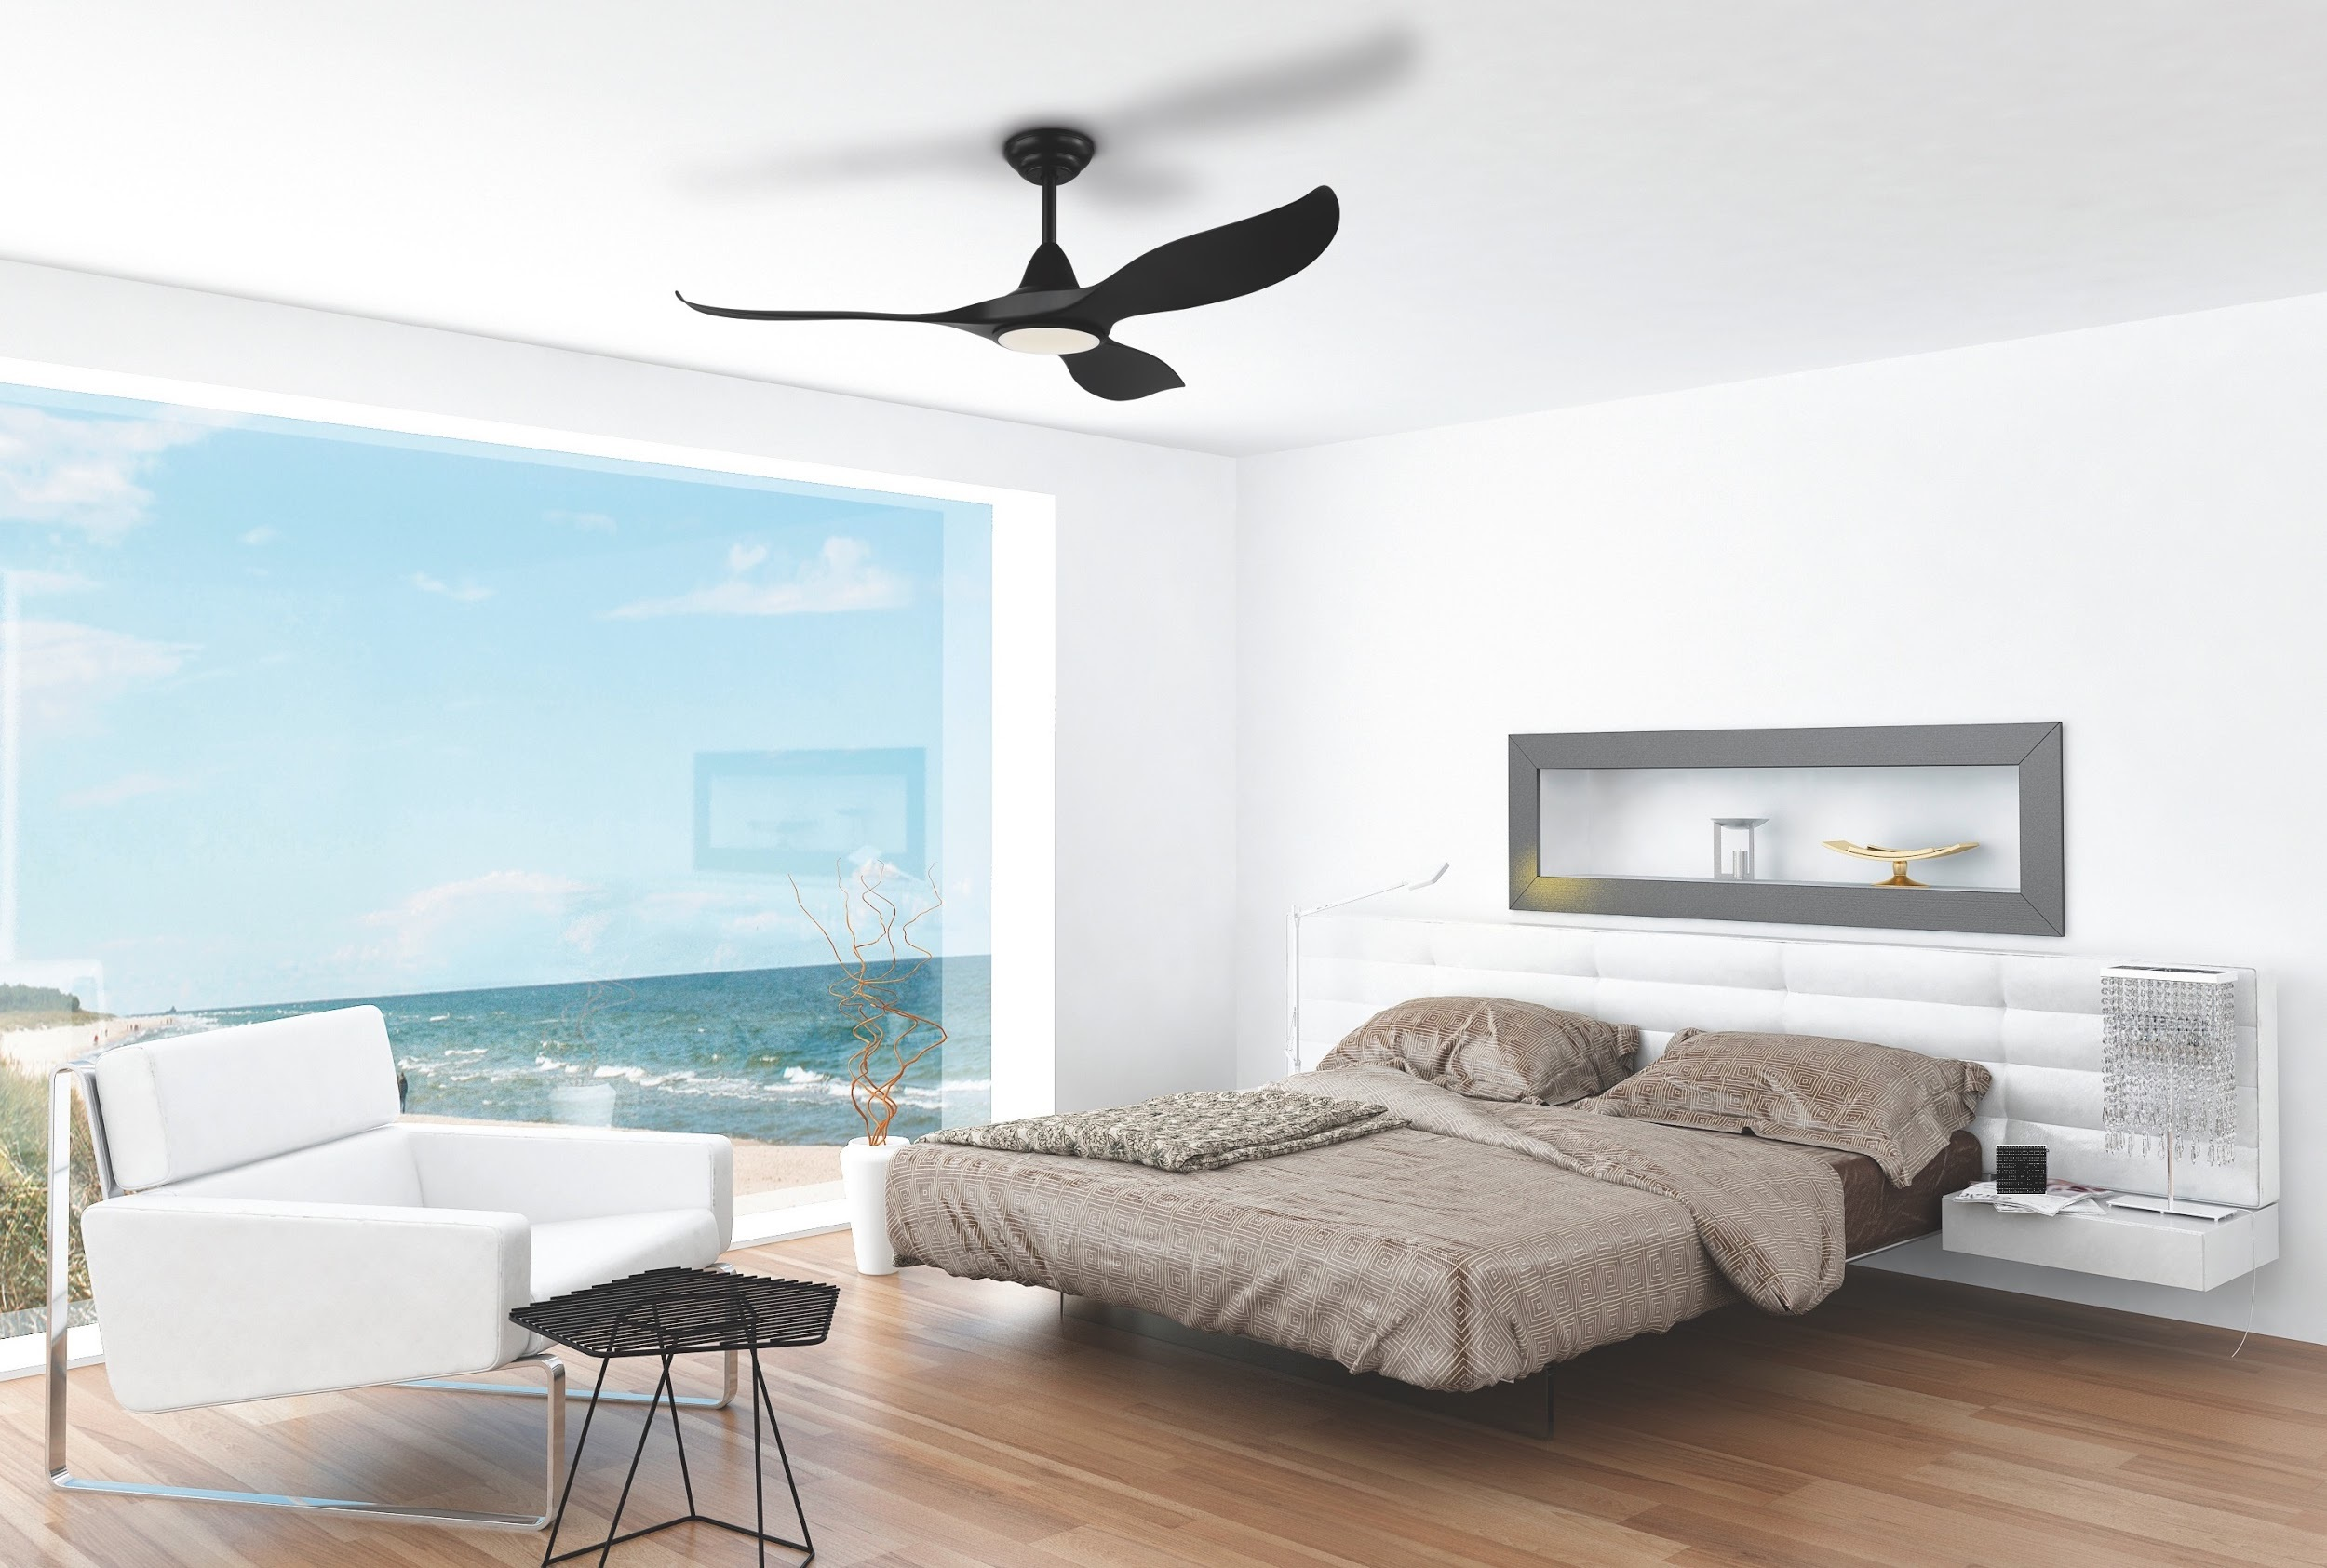 Utilizing Ceiling Fans and Air Circulation